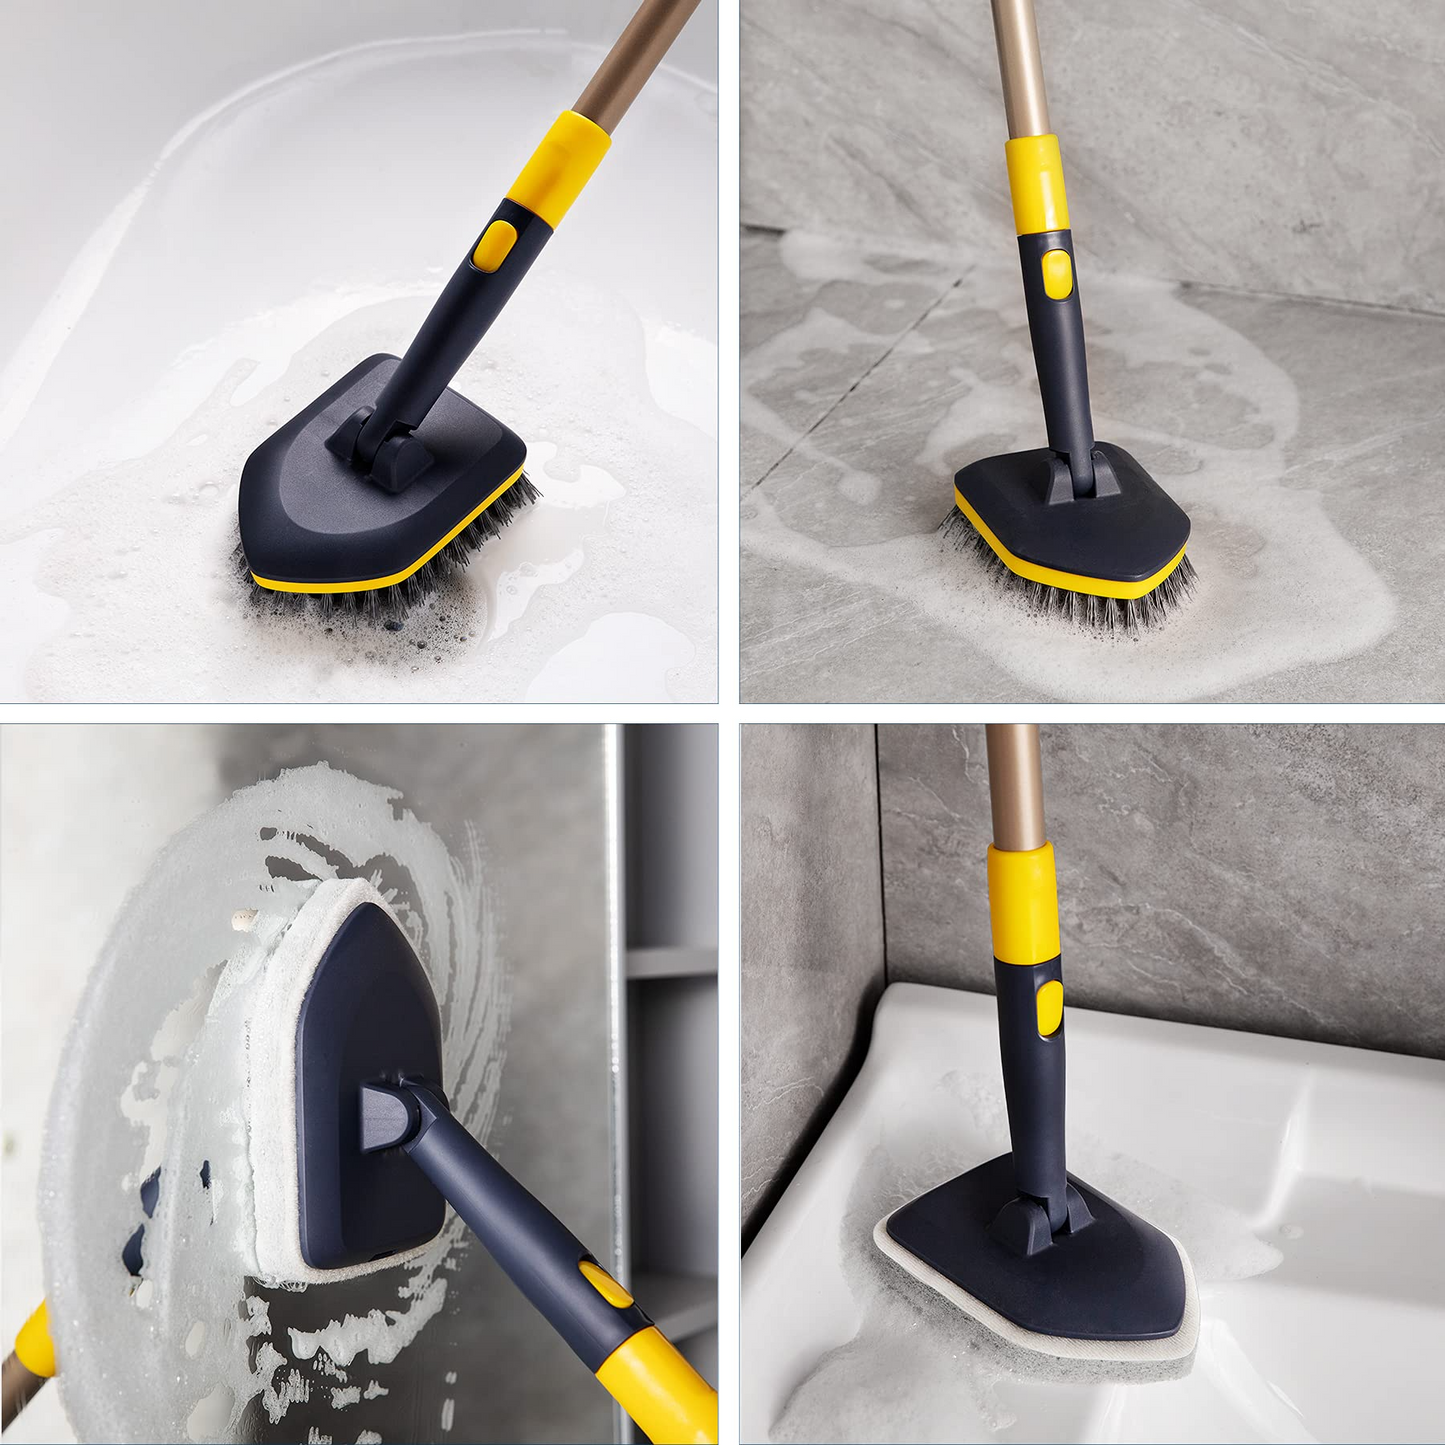 Yocada Tub Tile Cleaning Brush 2 in 1 Cleaning Brush